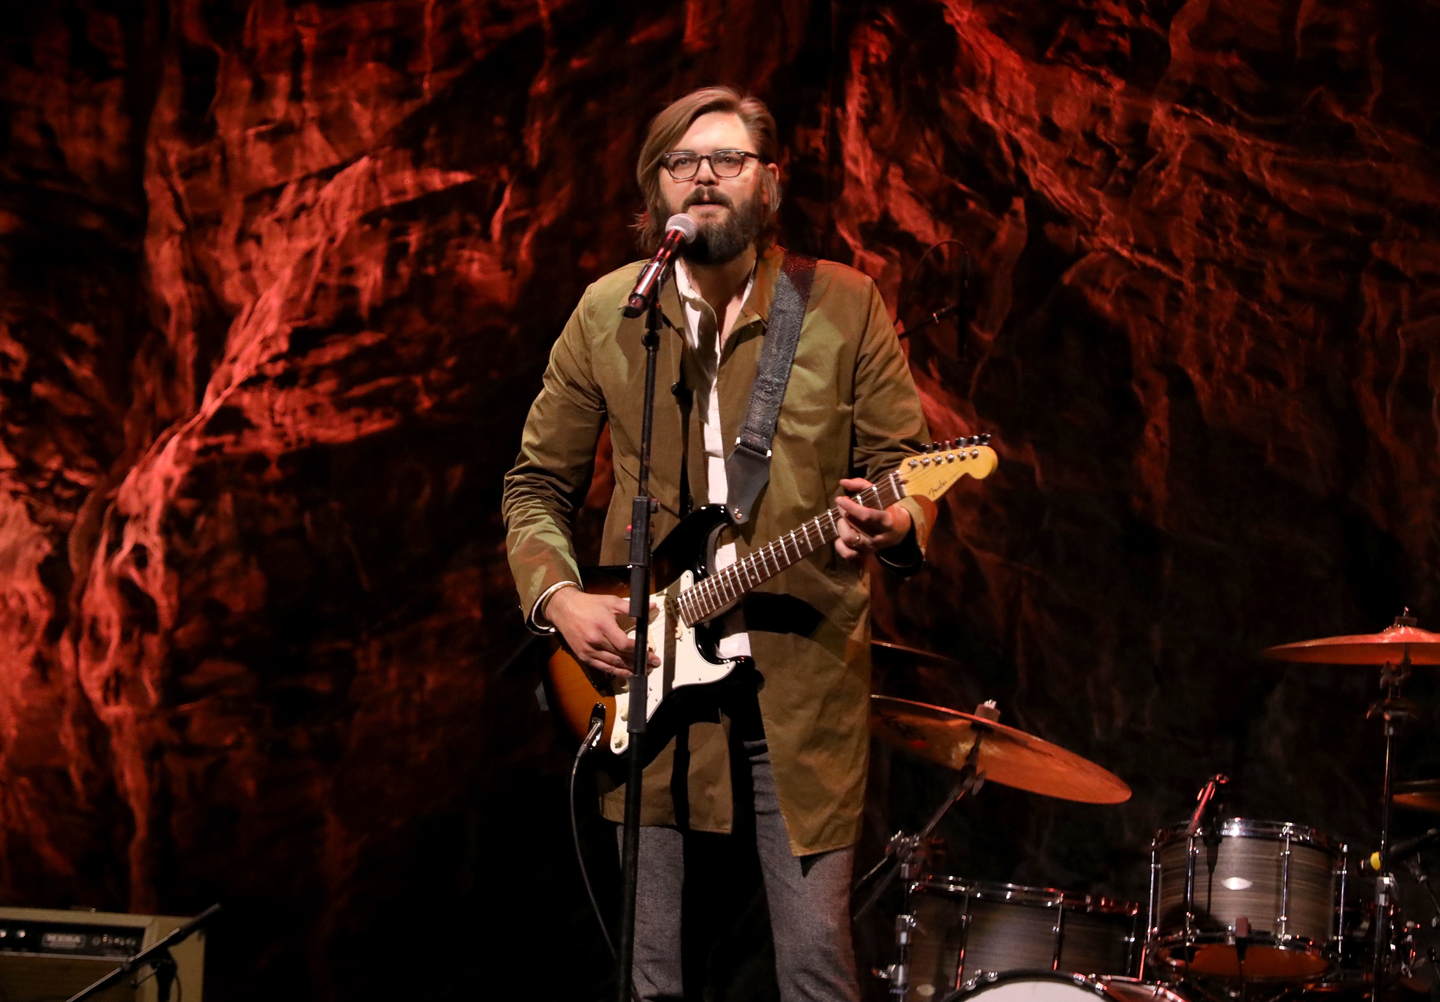 Nick Thune performs at Audible Impact. Photo by Diego Donamaria/Getty Images for SXSW